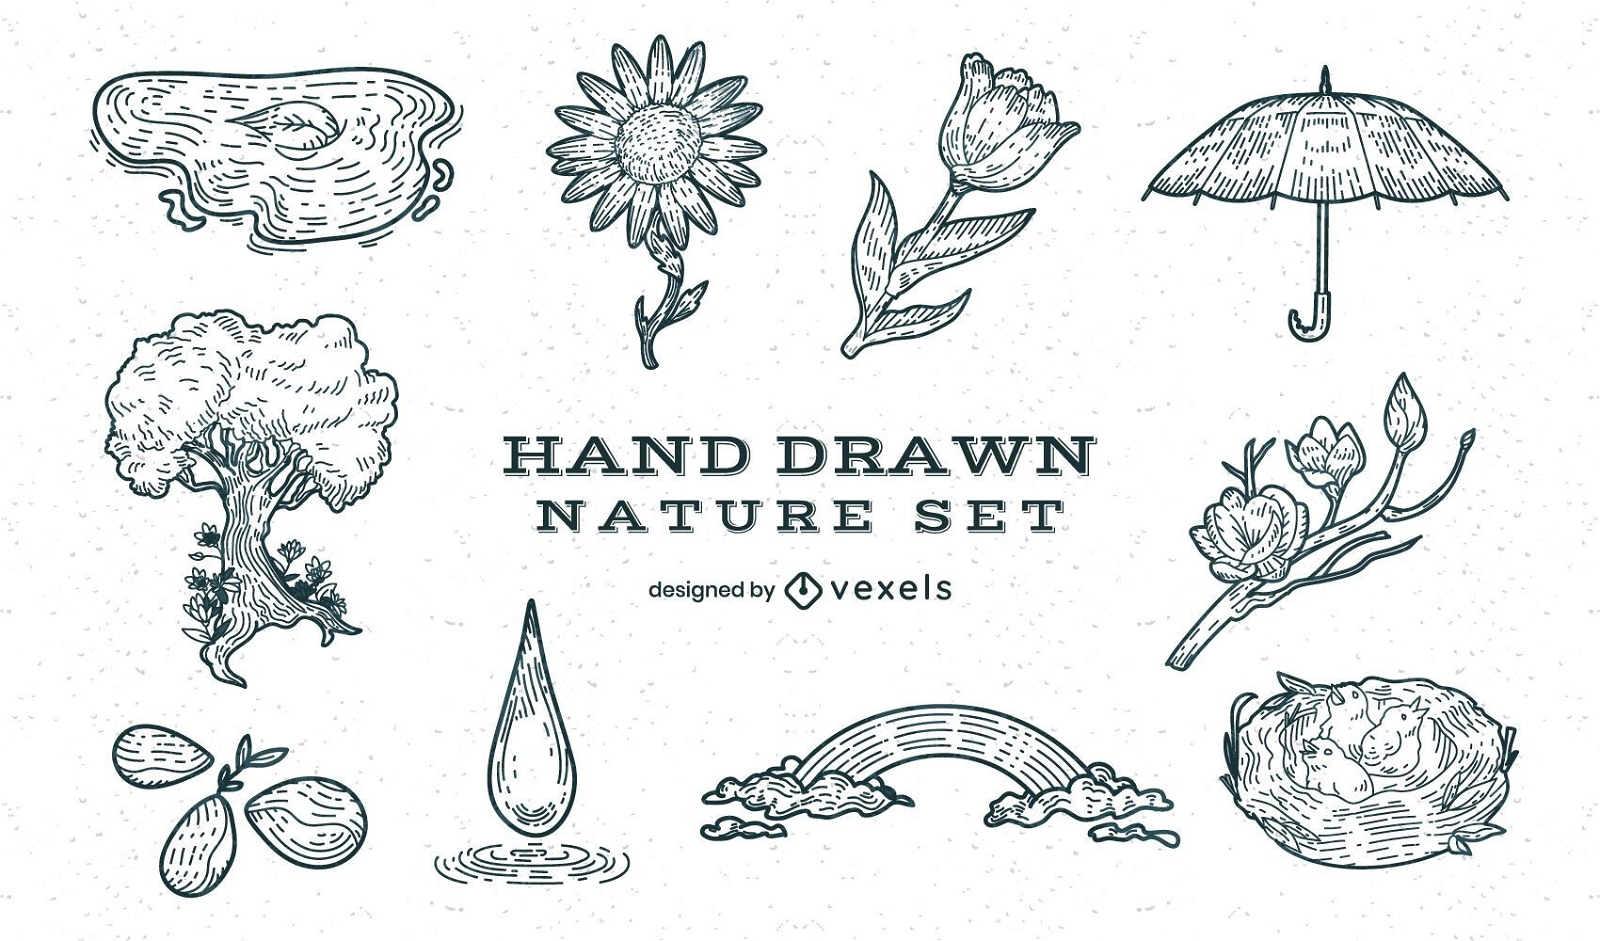 Nature forest hand-drawn element set